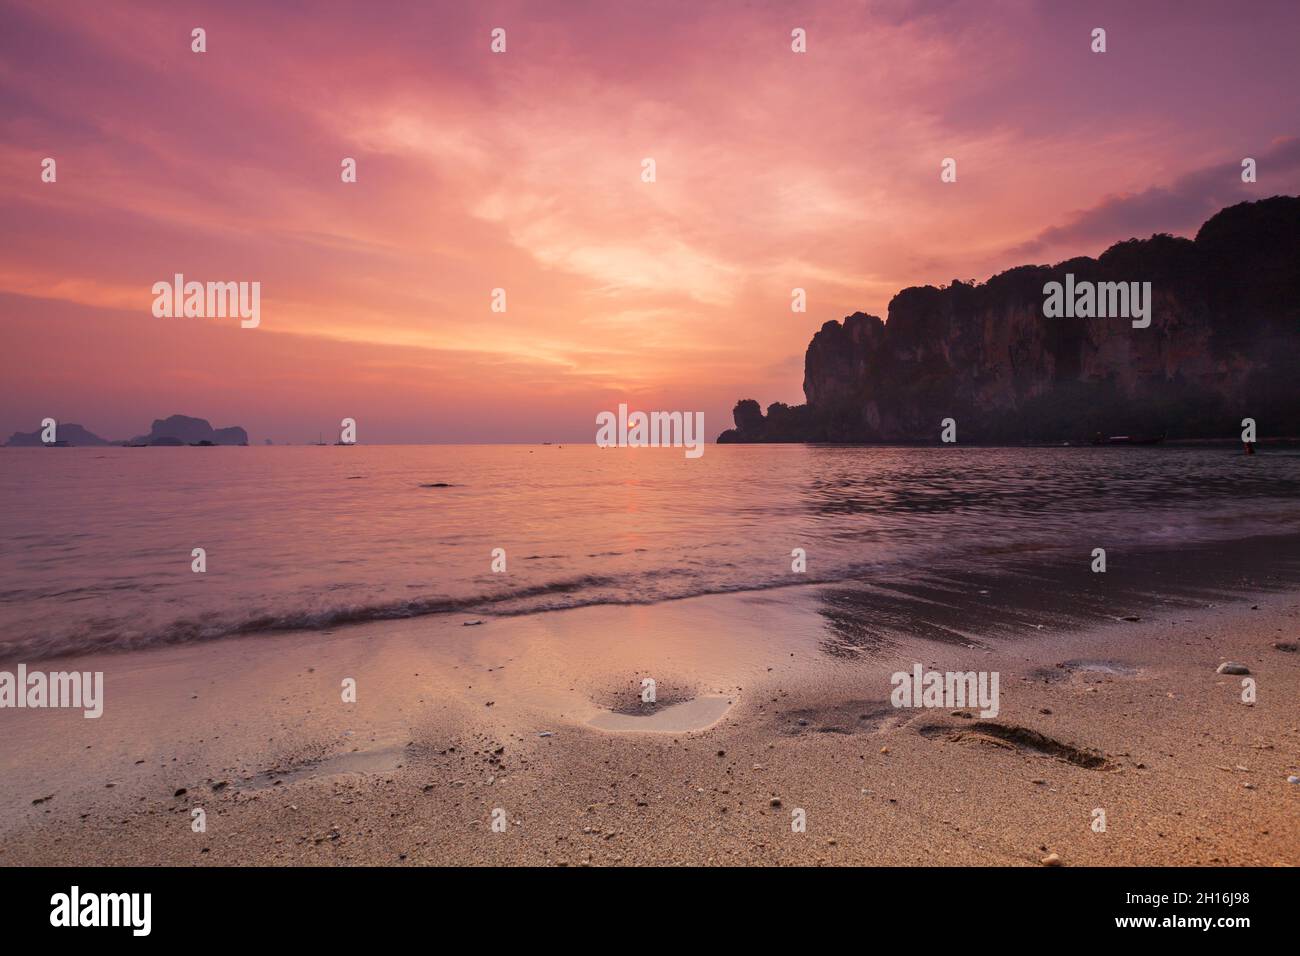 Beautiful beach in Thailand. Colorful sky in sunset. Reflection in ocean. Stock Photo